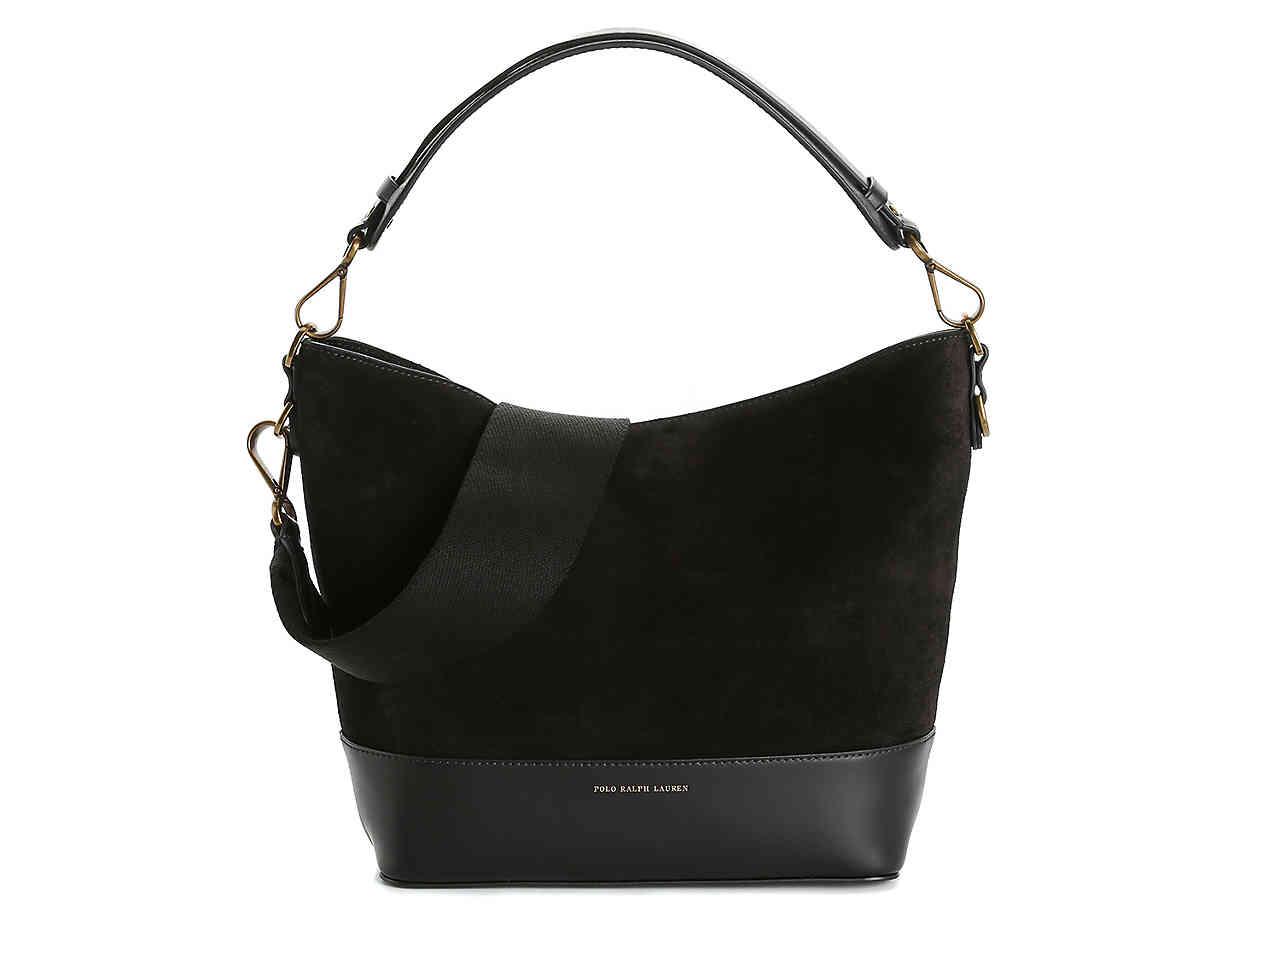 Polo Ralph Lauren Small Suede Leather Hobo Bag in Black - Lyst